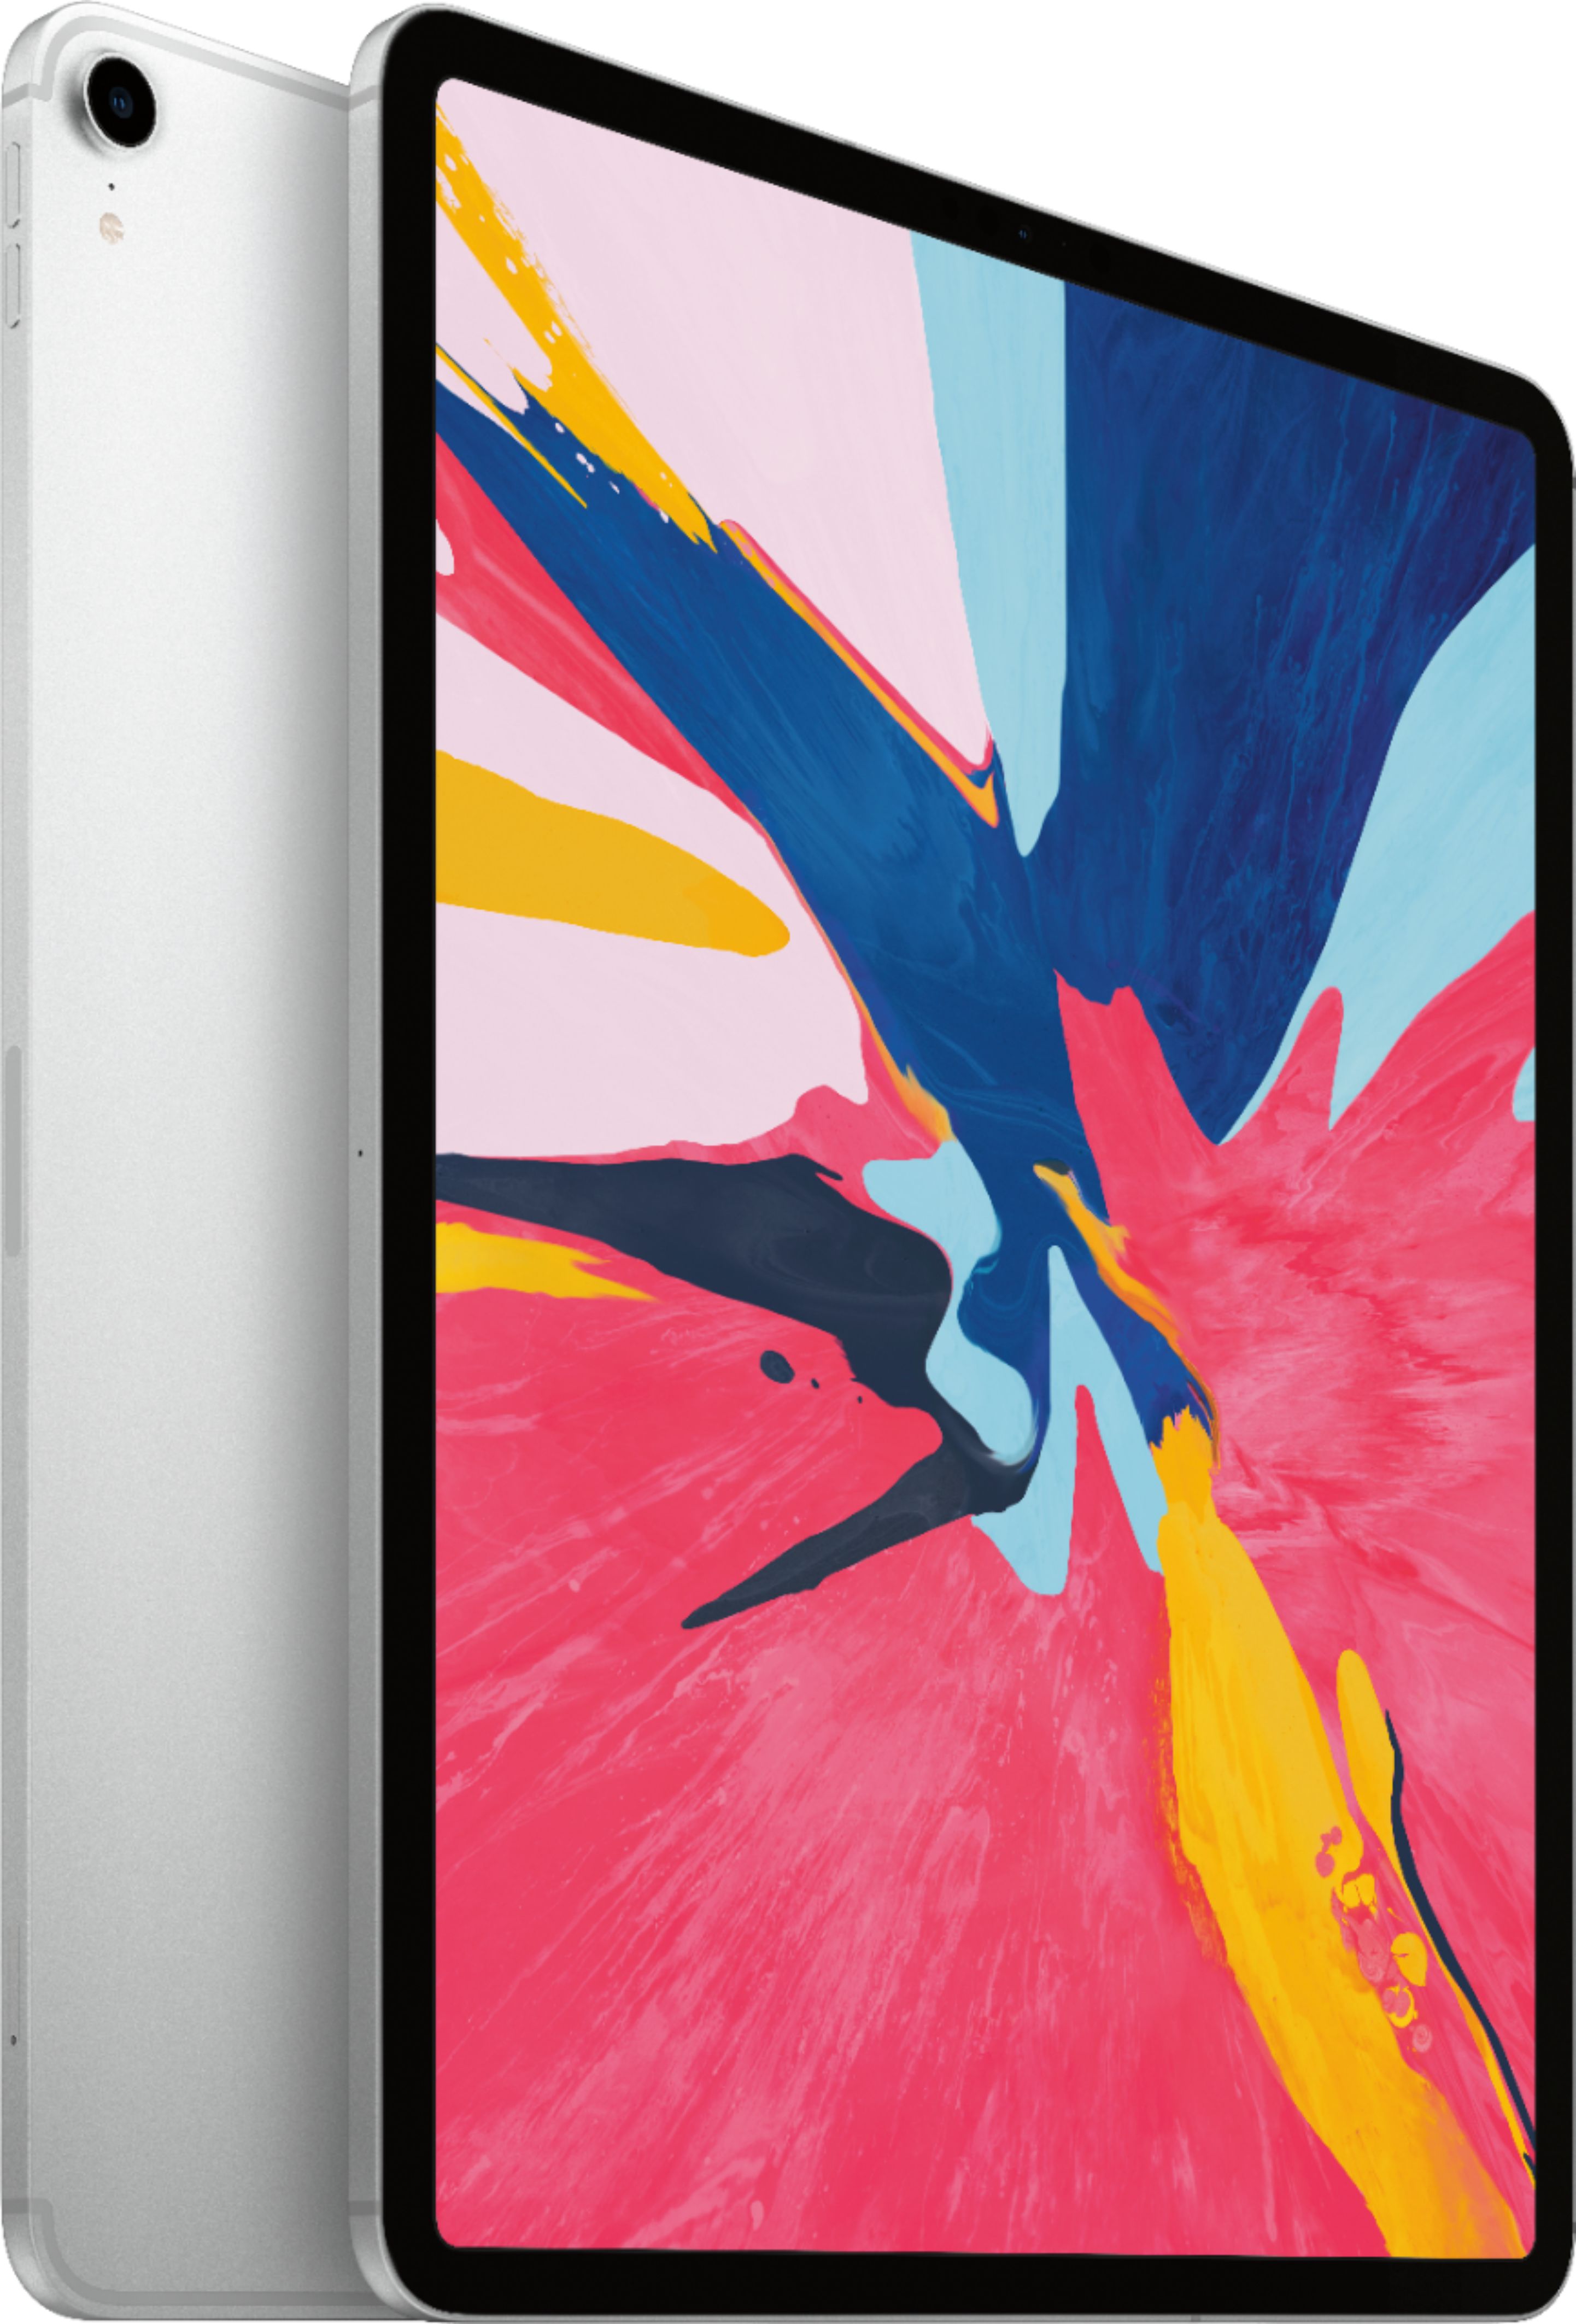 Angle View: Apple - 11-Inch iPad Pro (2nd Generation) with Wi-Fi + Cellular - 128GB (Unlocked) - Silver